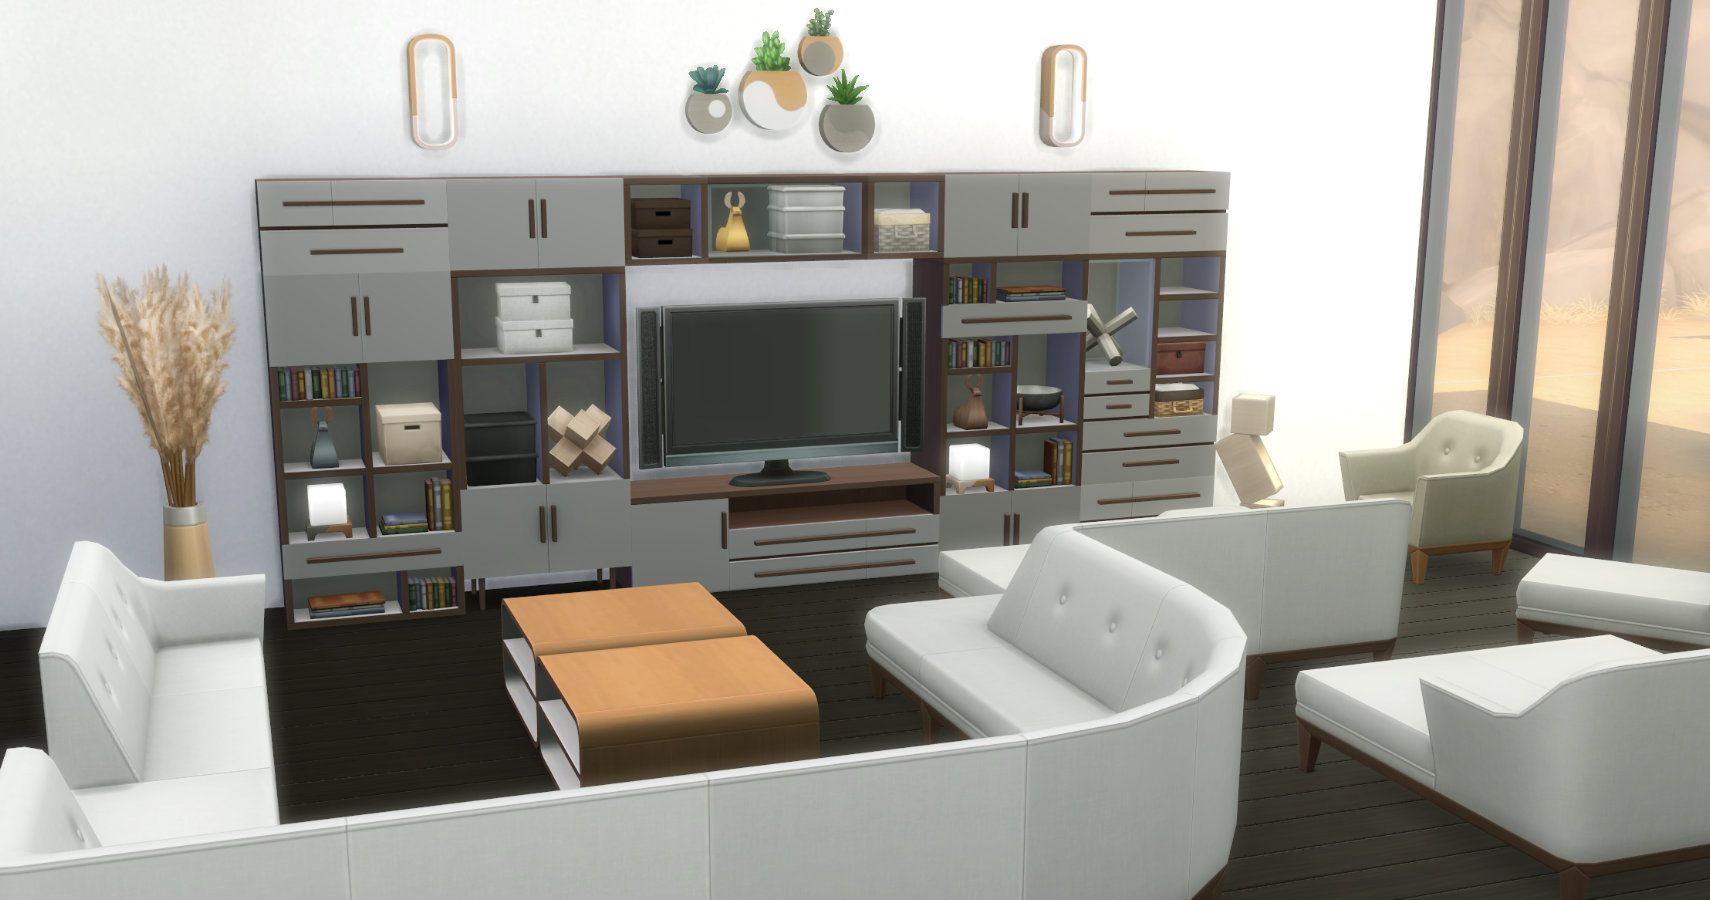 Vijftig Hond Verslaafd The Sims 4: A Complete Guide To Modular Furniture